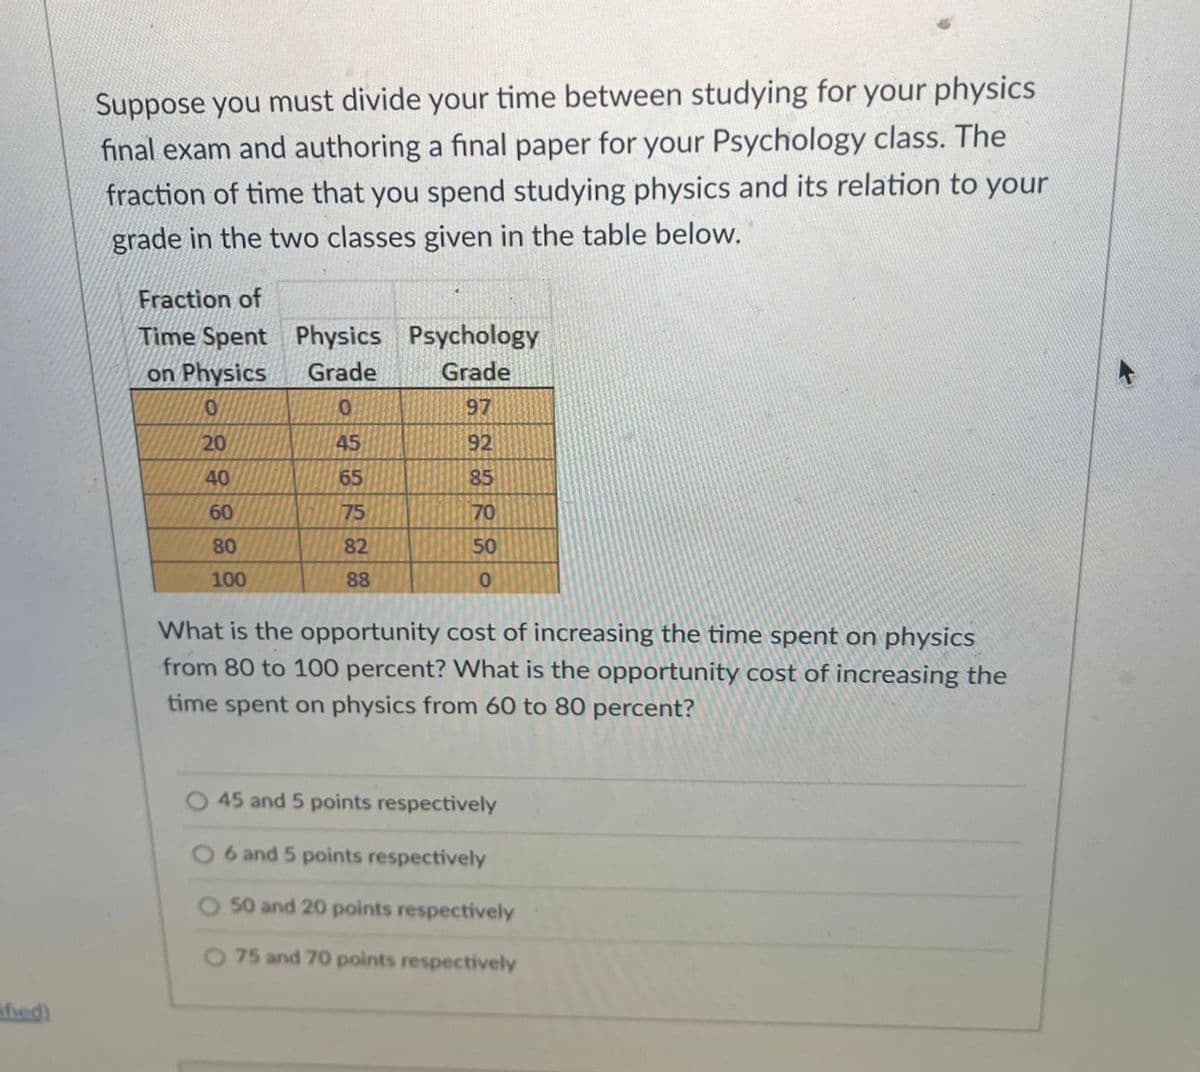 Suppose you must divide your time between studying for your physics
final exam and authoring a final paper for your Psychology class. The
fraction of time that you spend studying physics and its relation to your
grade in the two classes given in the table below.
Fraction of
Time Spent Physics Psychology
on Physics
Grade
Grade
97
20
45
92
40
65
85
60
75
70
80
82
50
100
88
What is the opportunity cost of increasing the time spent on physics
from 80 to 100 percent? What is the opportunity cost of increasing the
time spent on physics from 60 to 80 percent?
45 and 5 points respectively
6 and 5 points respectively
50 and 20 points respectively
O 75 and 70 points respectively
fied)
